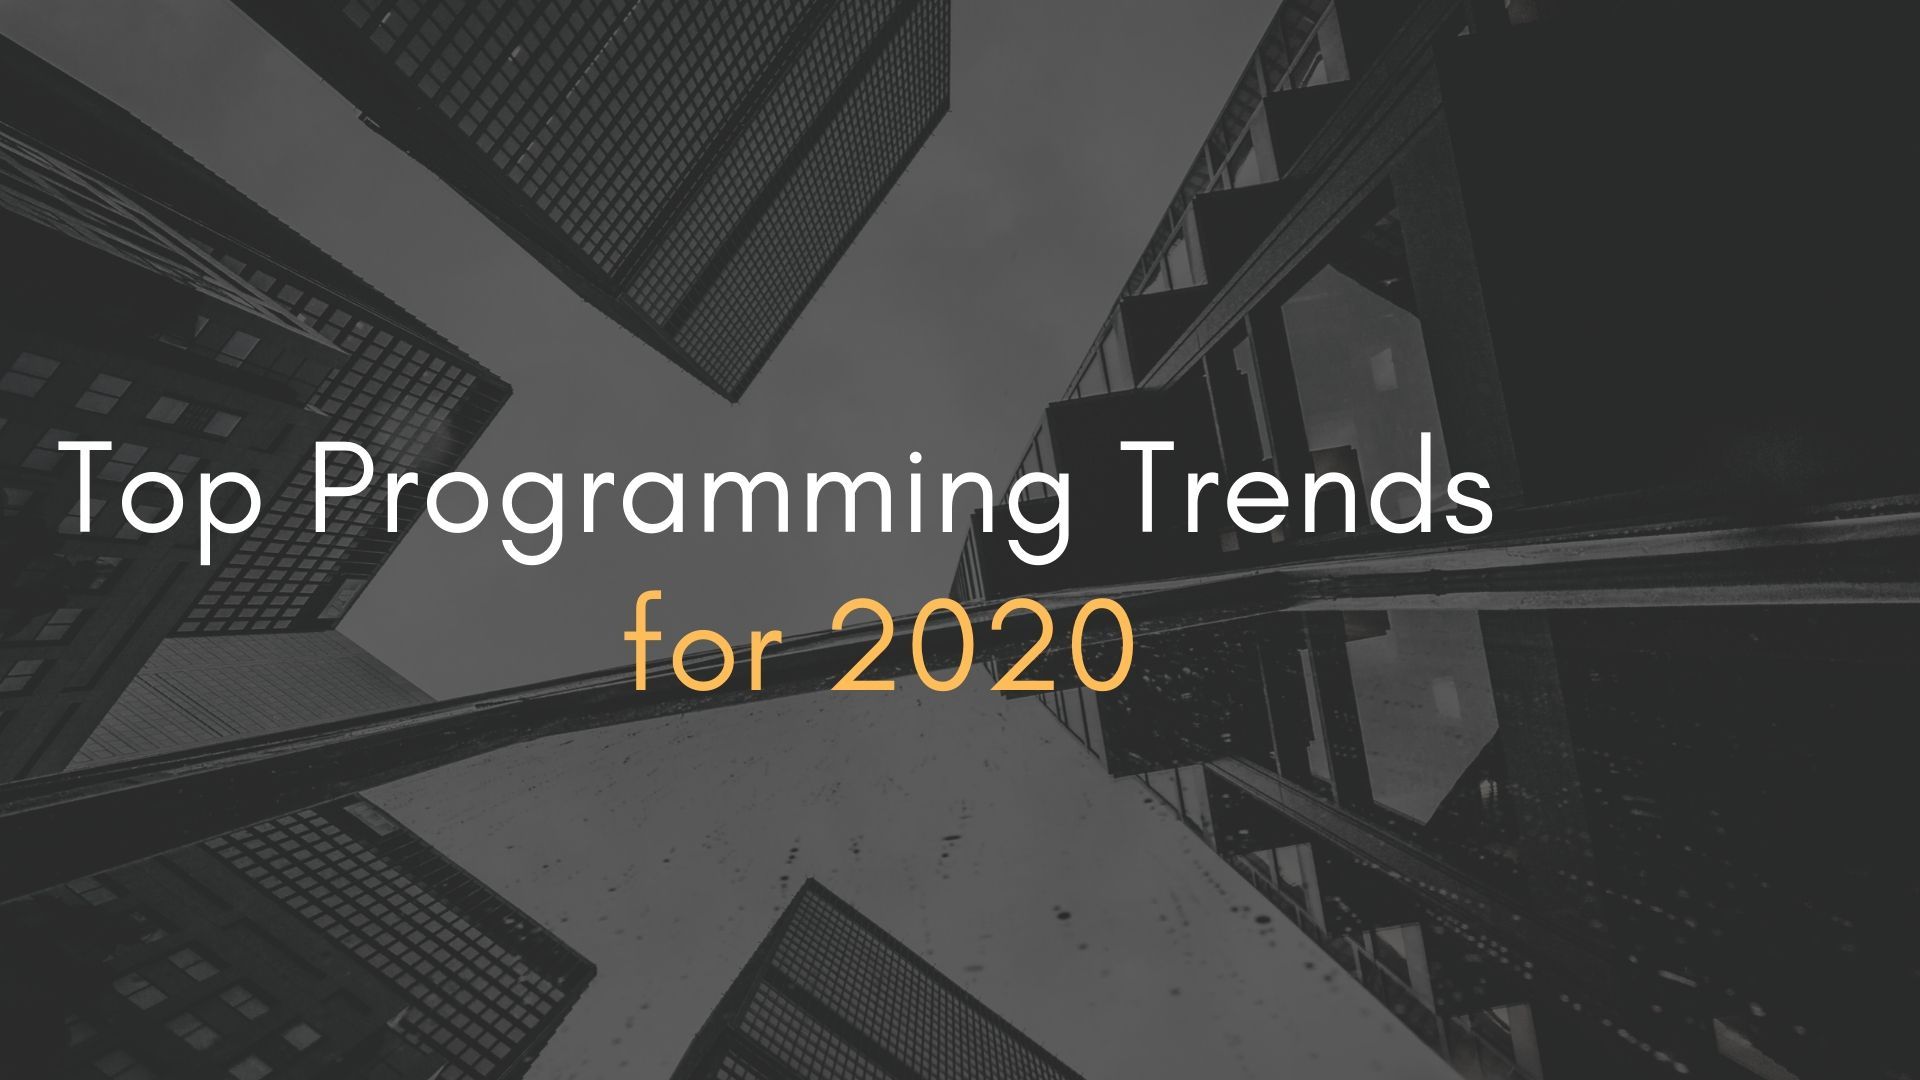 Top Programming Trends for 2020